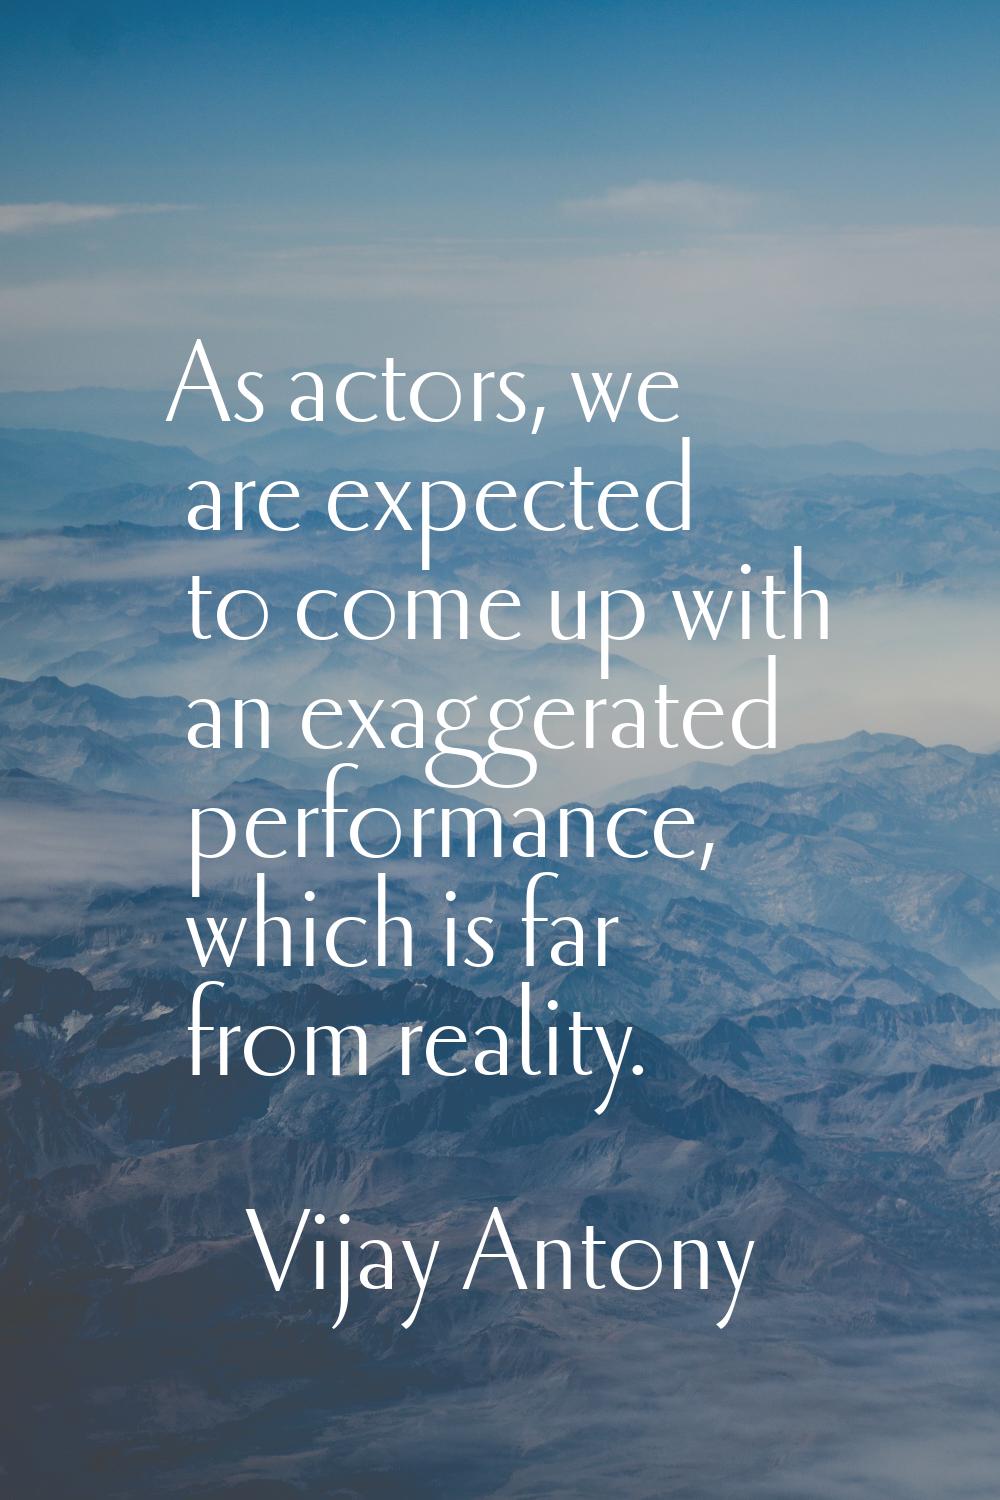 As actors, we are expected to come up with an exaggerated performance, which is far from reality.